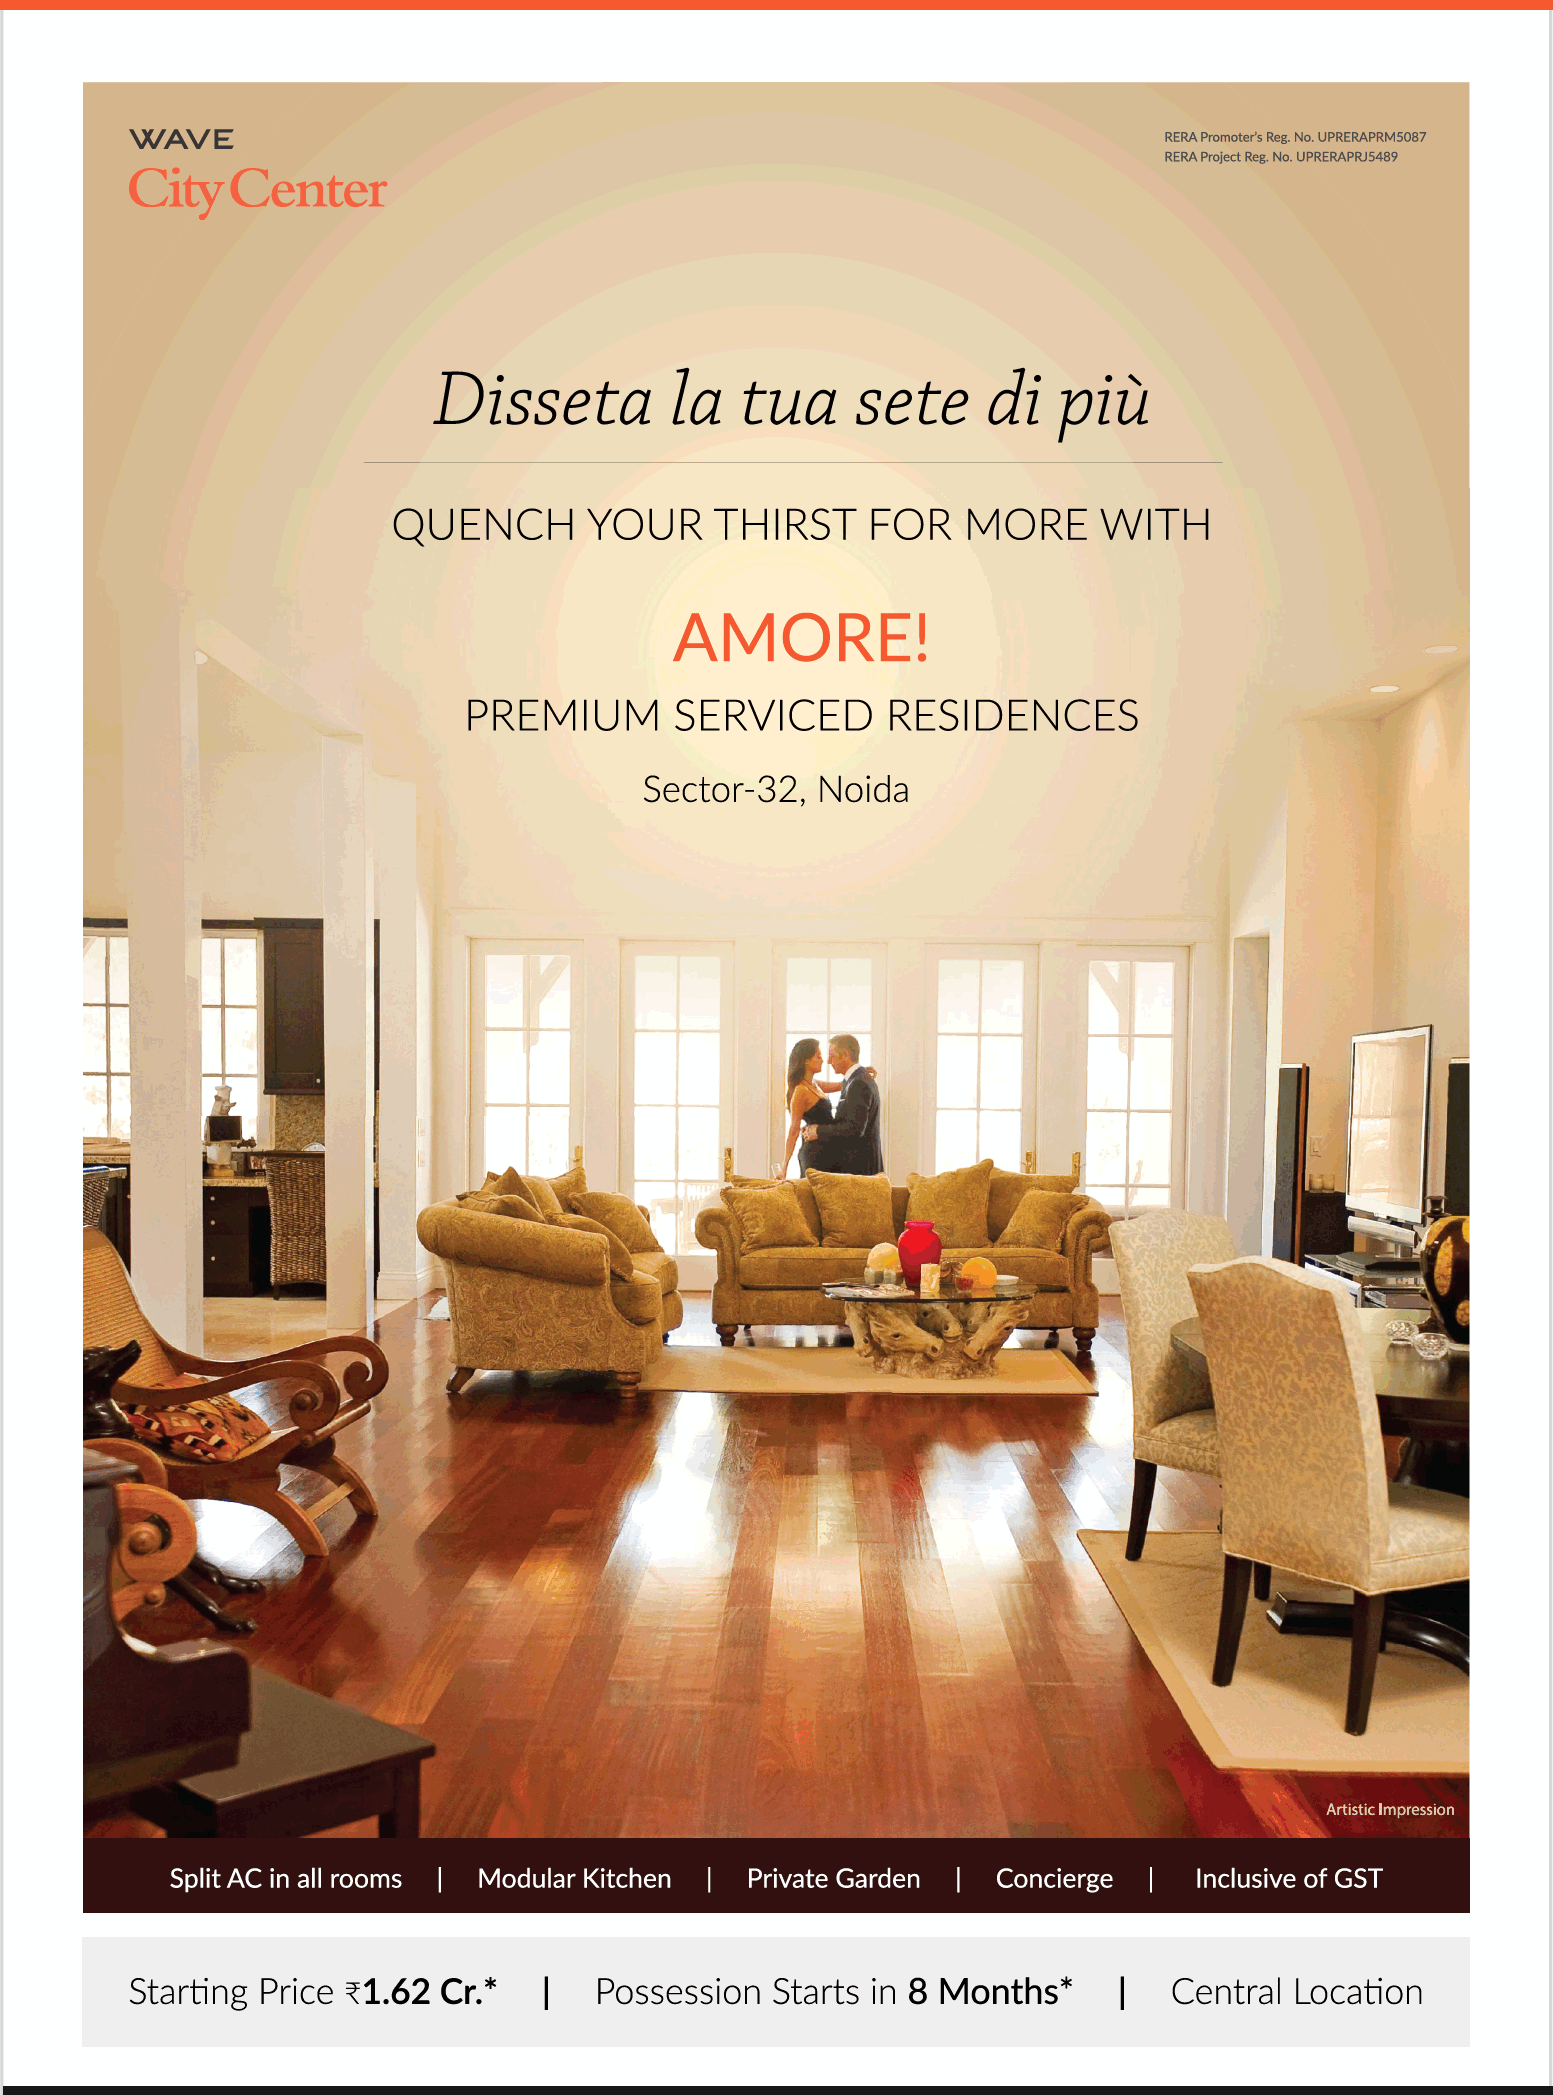 Avail premium services residences at Wave City Center Amore in Noida Update